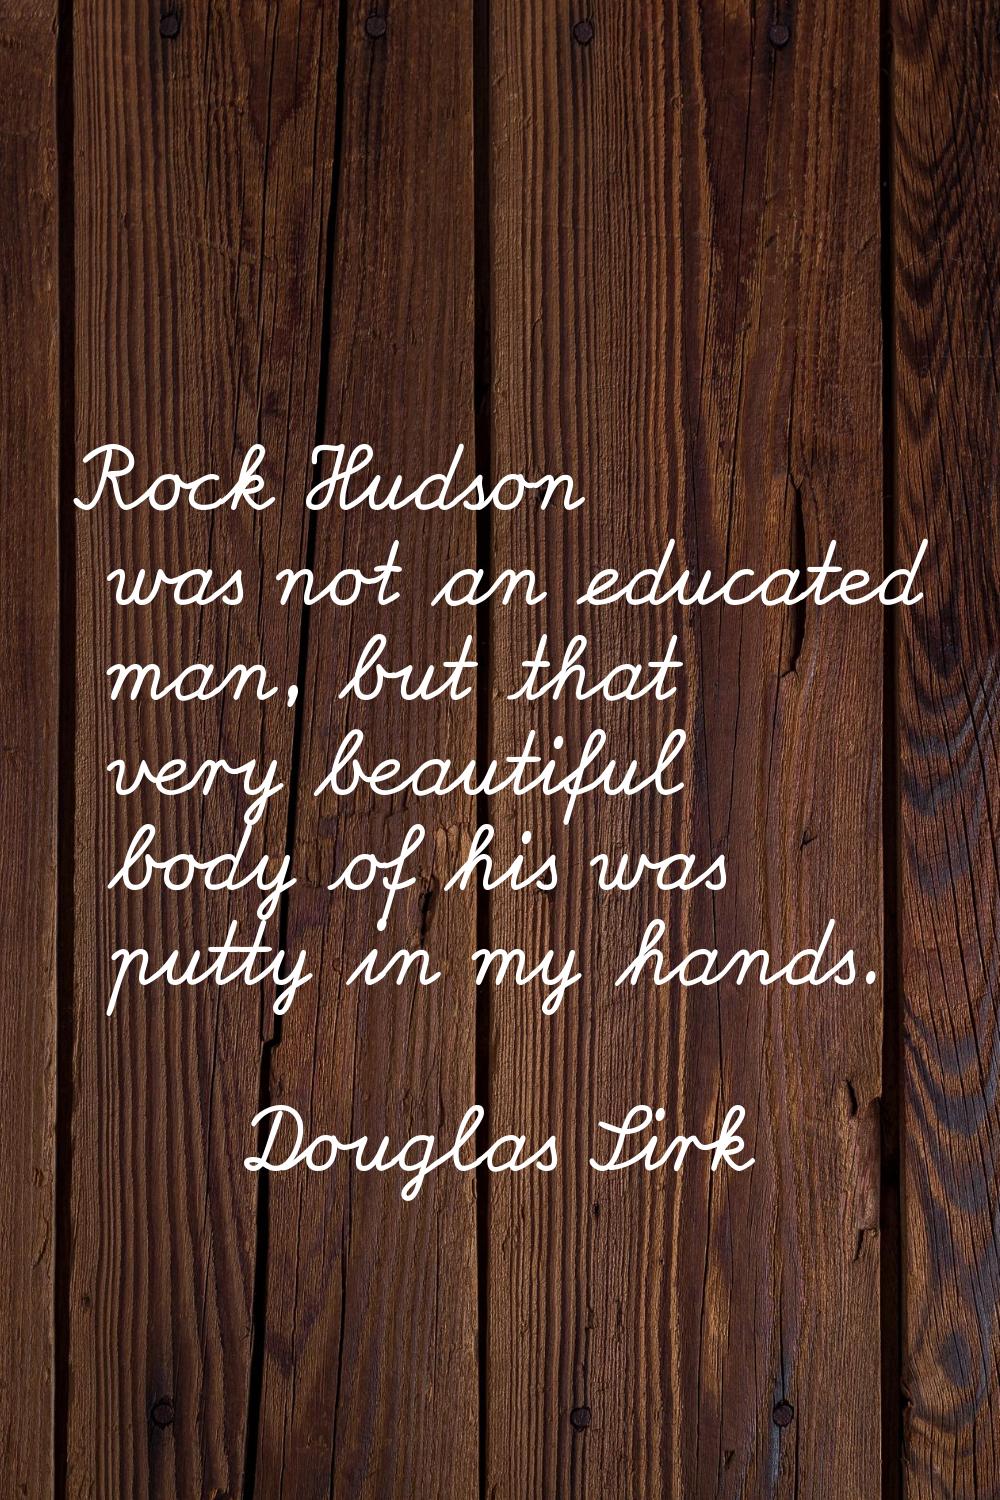 Rock Hudson was not an educated man, but that very beautiful body of his was putty in my hands.